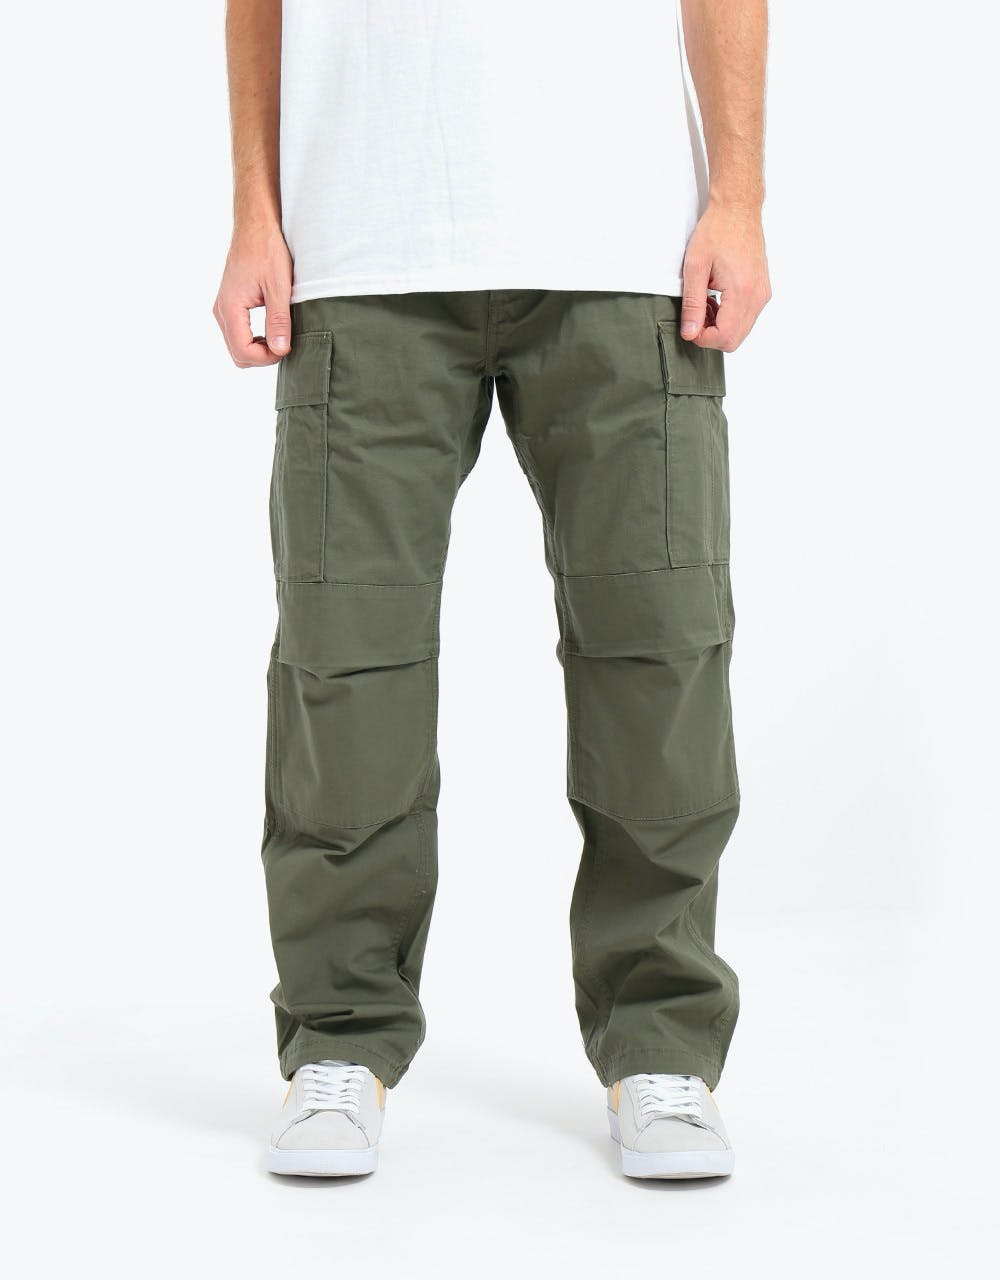 Levi's Skateboarding Cargo Pant - S&E Olive Night Ripstop – Route One